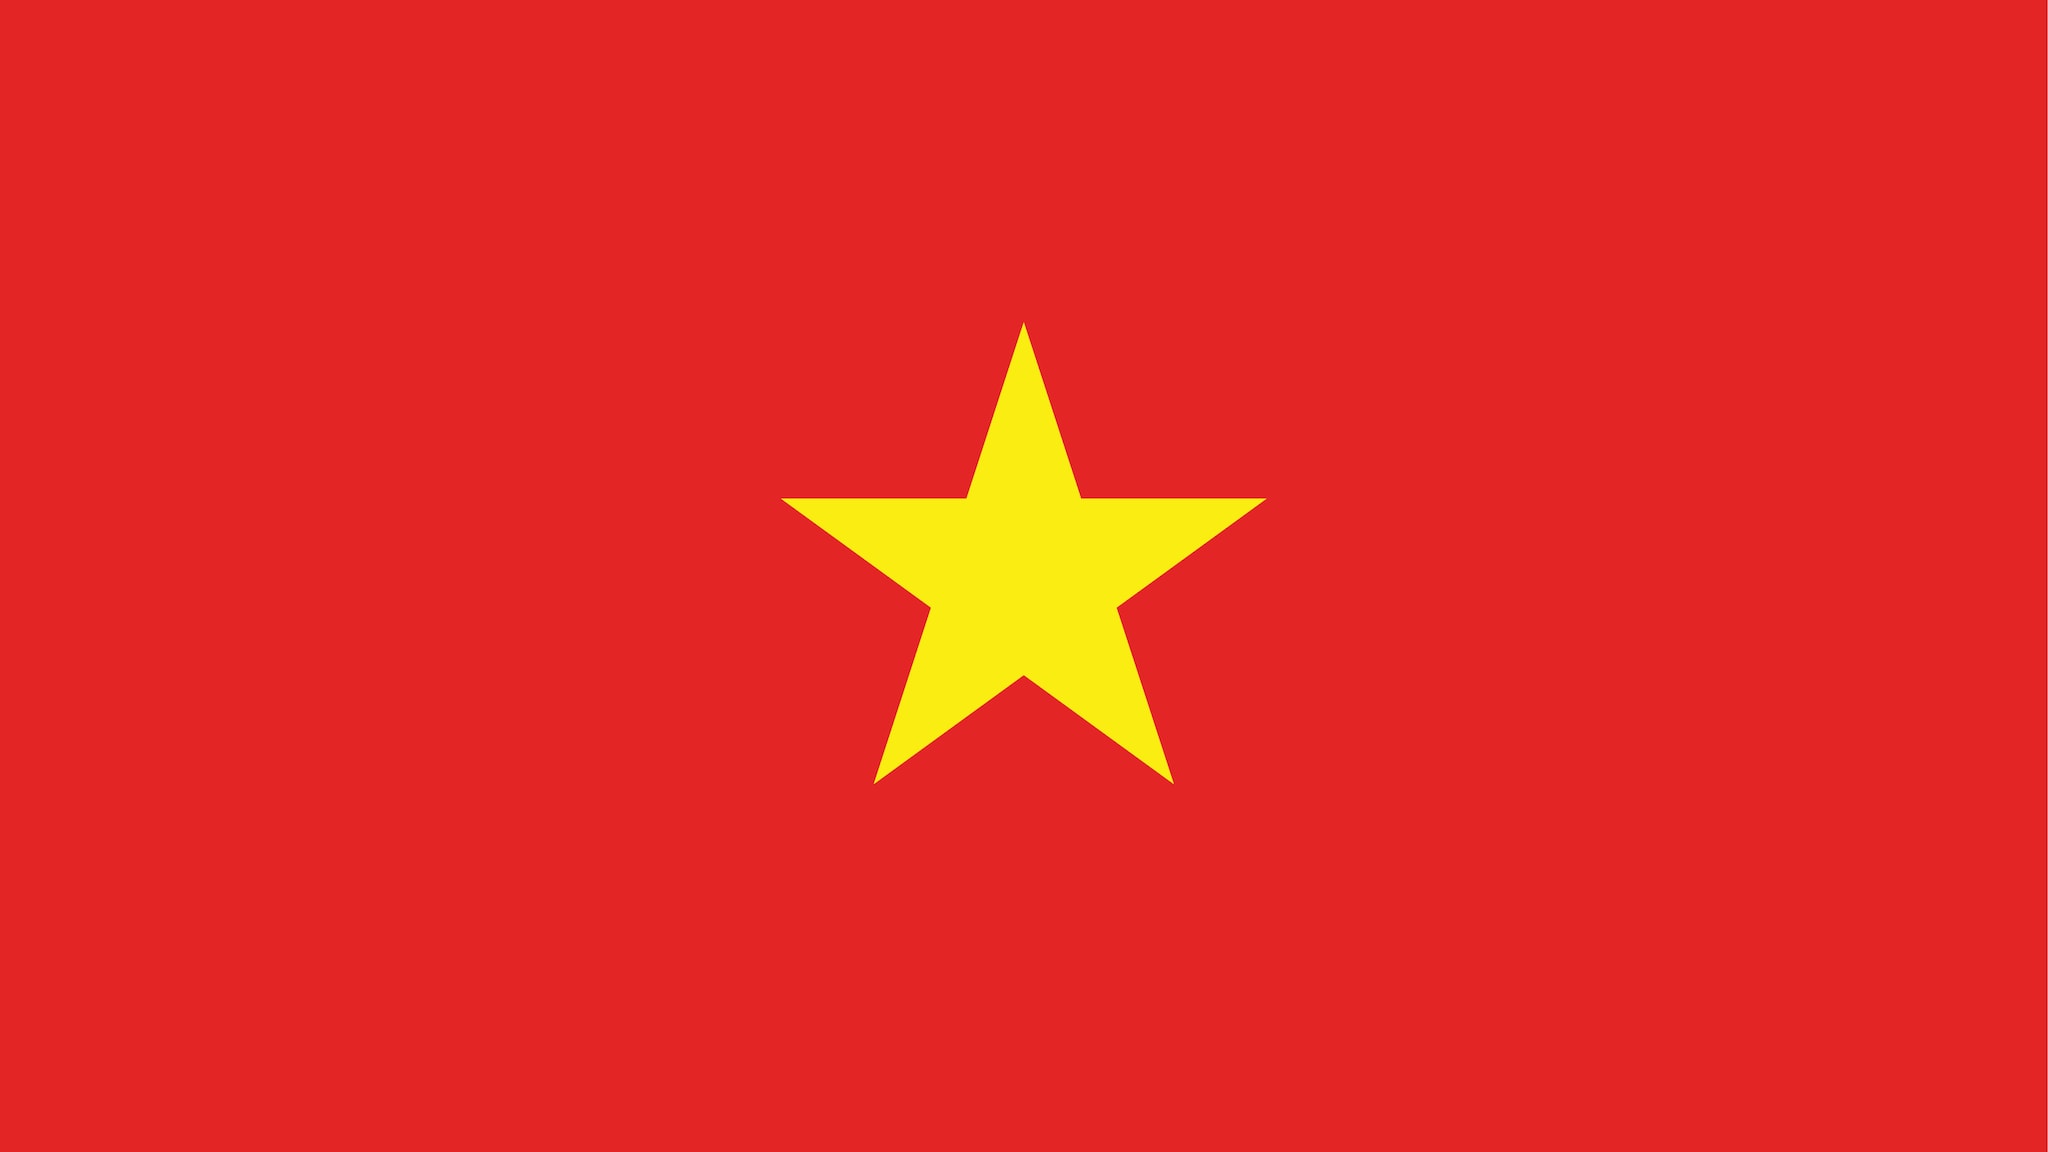 Red rectangle with yellow star in the middle